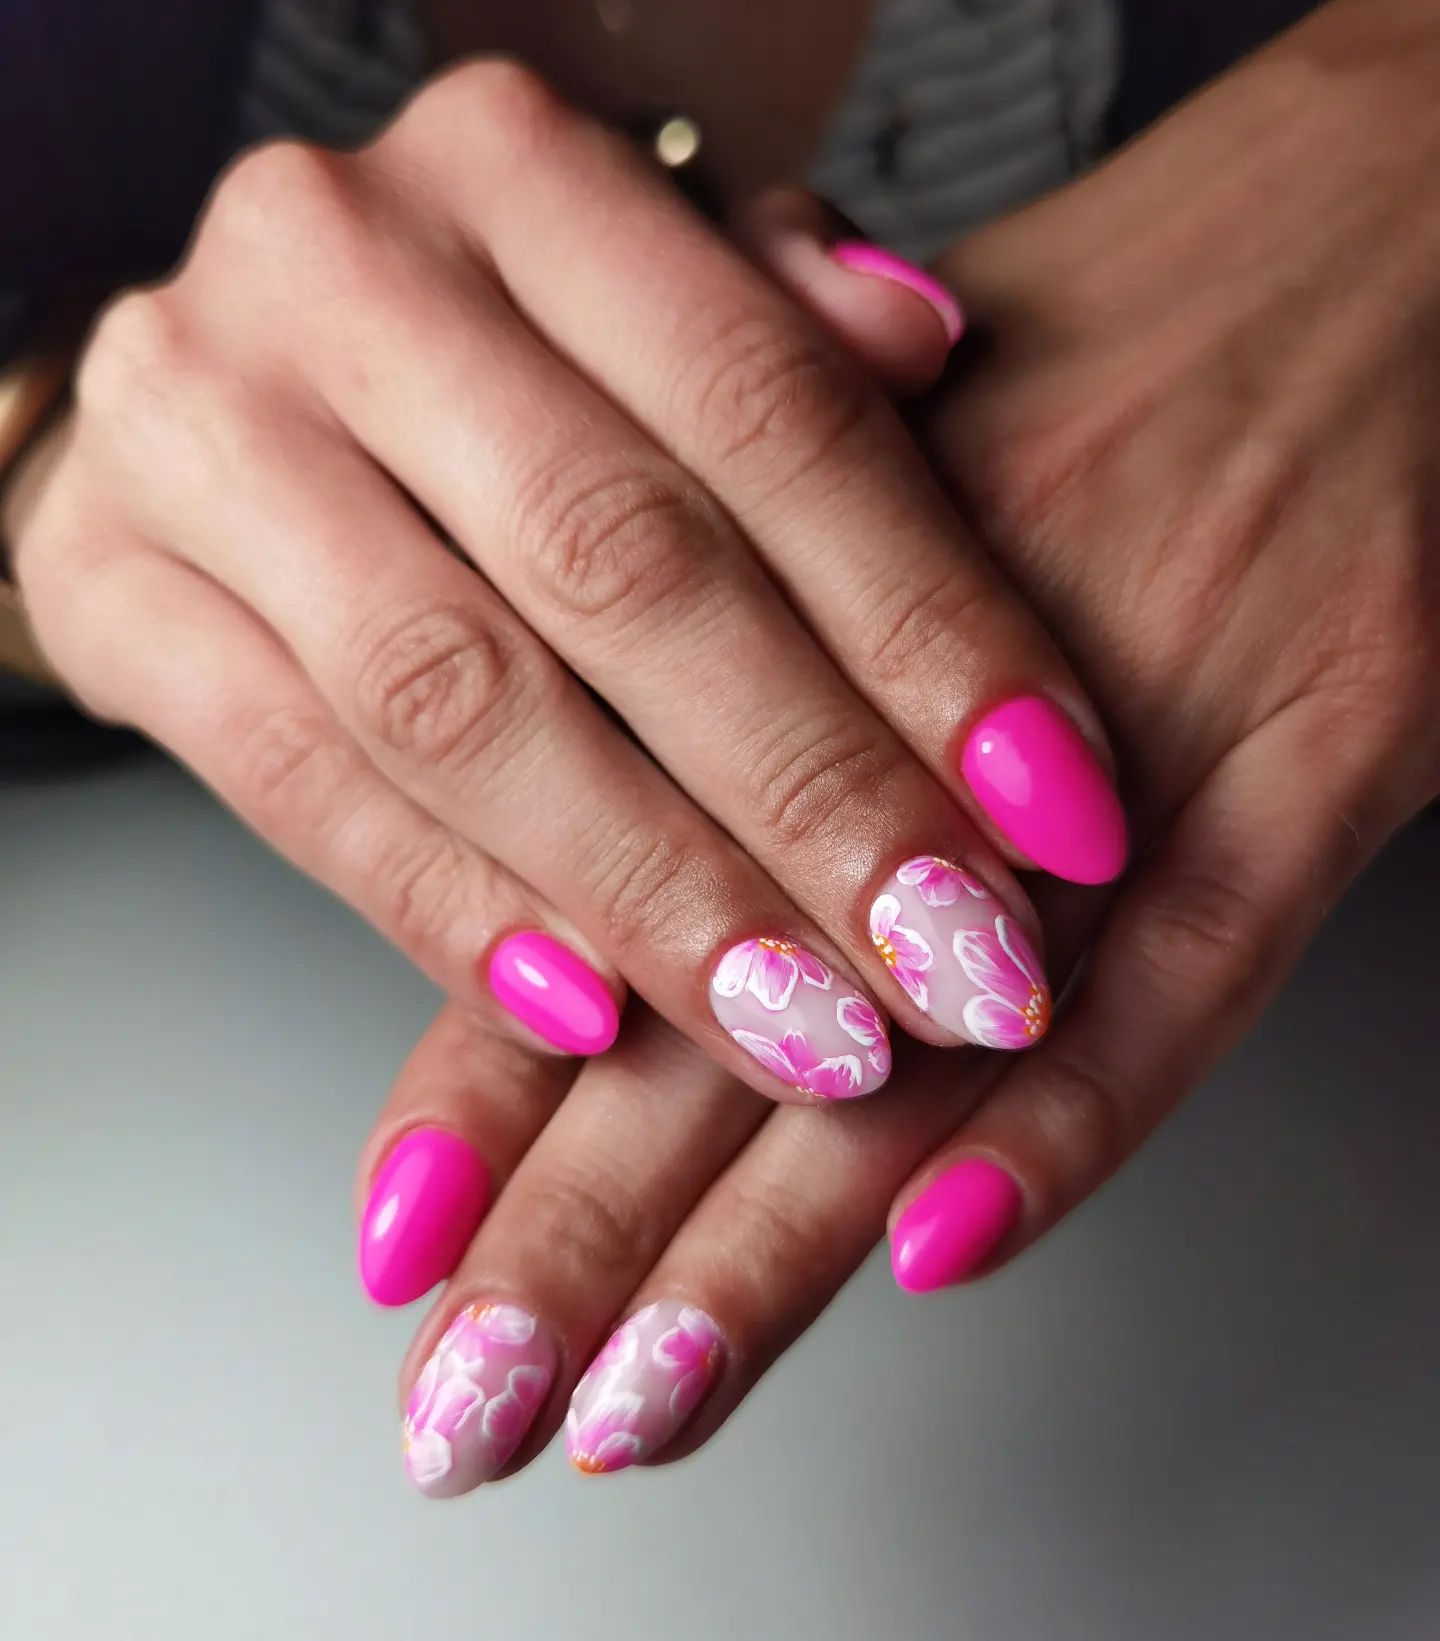 Deep Pink Almond Nails with Glitter Fade - Doing My Own Nails! - YouTube